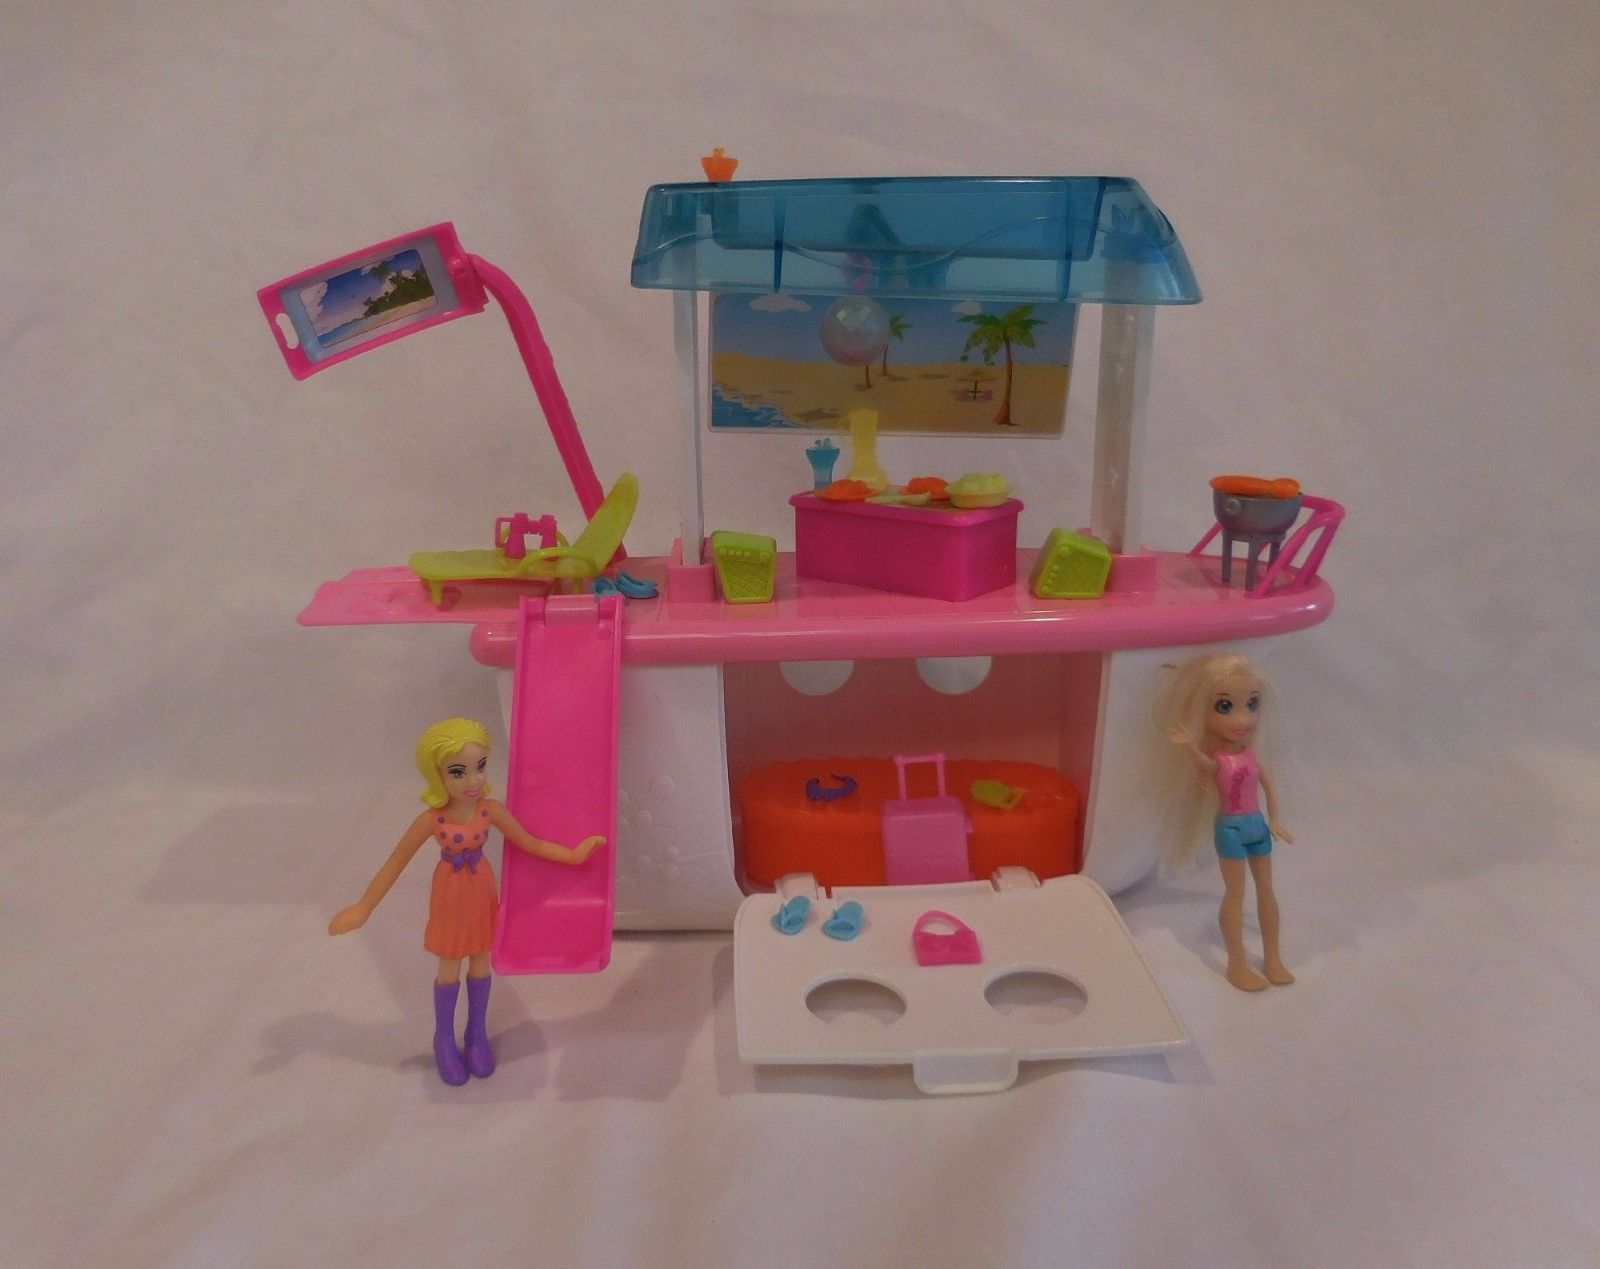 Polly Pocket Doll Boat & Cruise Ship with Fun Accessories and Dolls! - $11.92